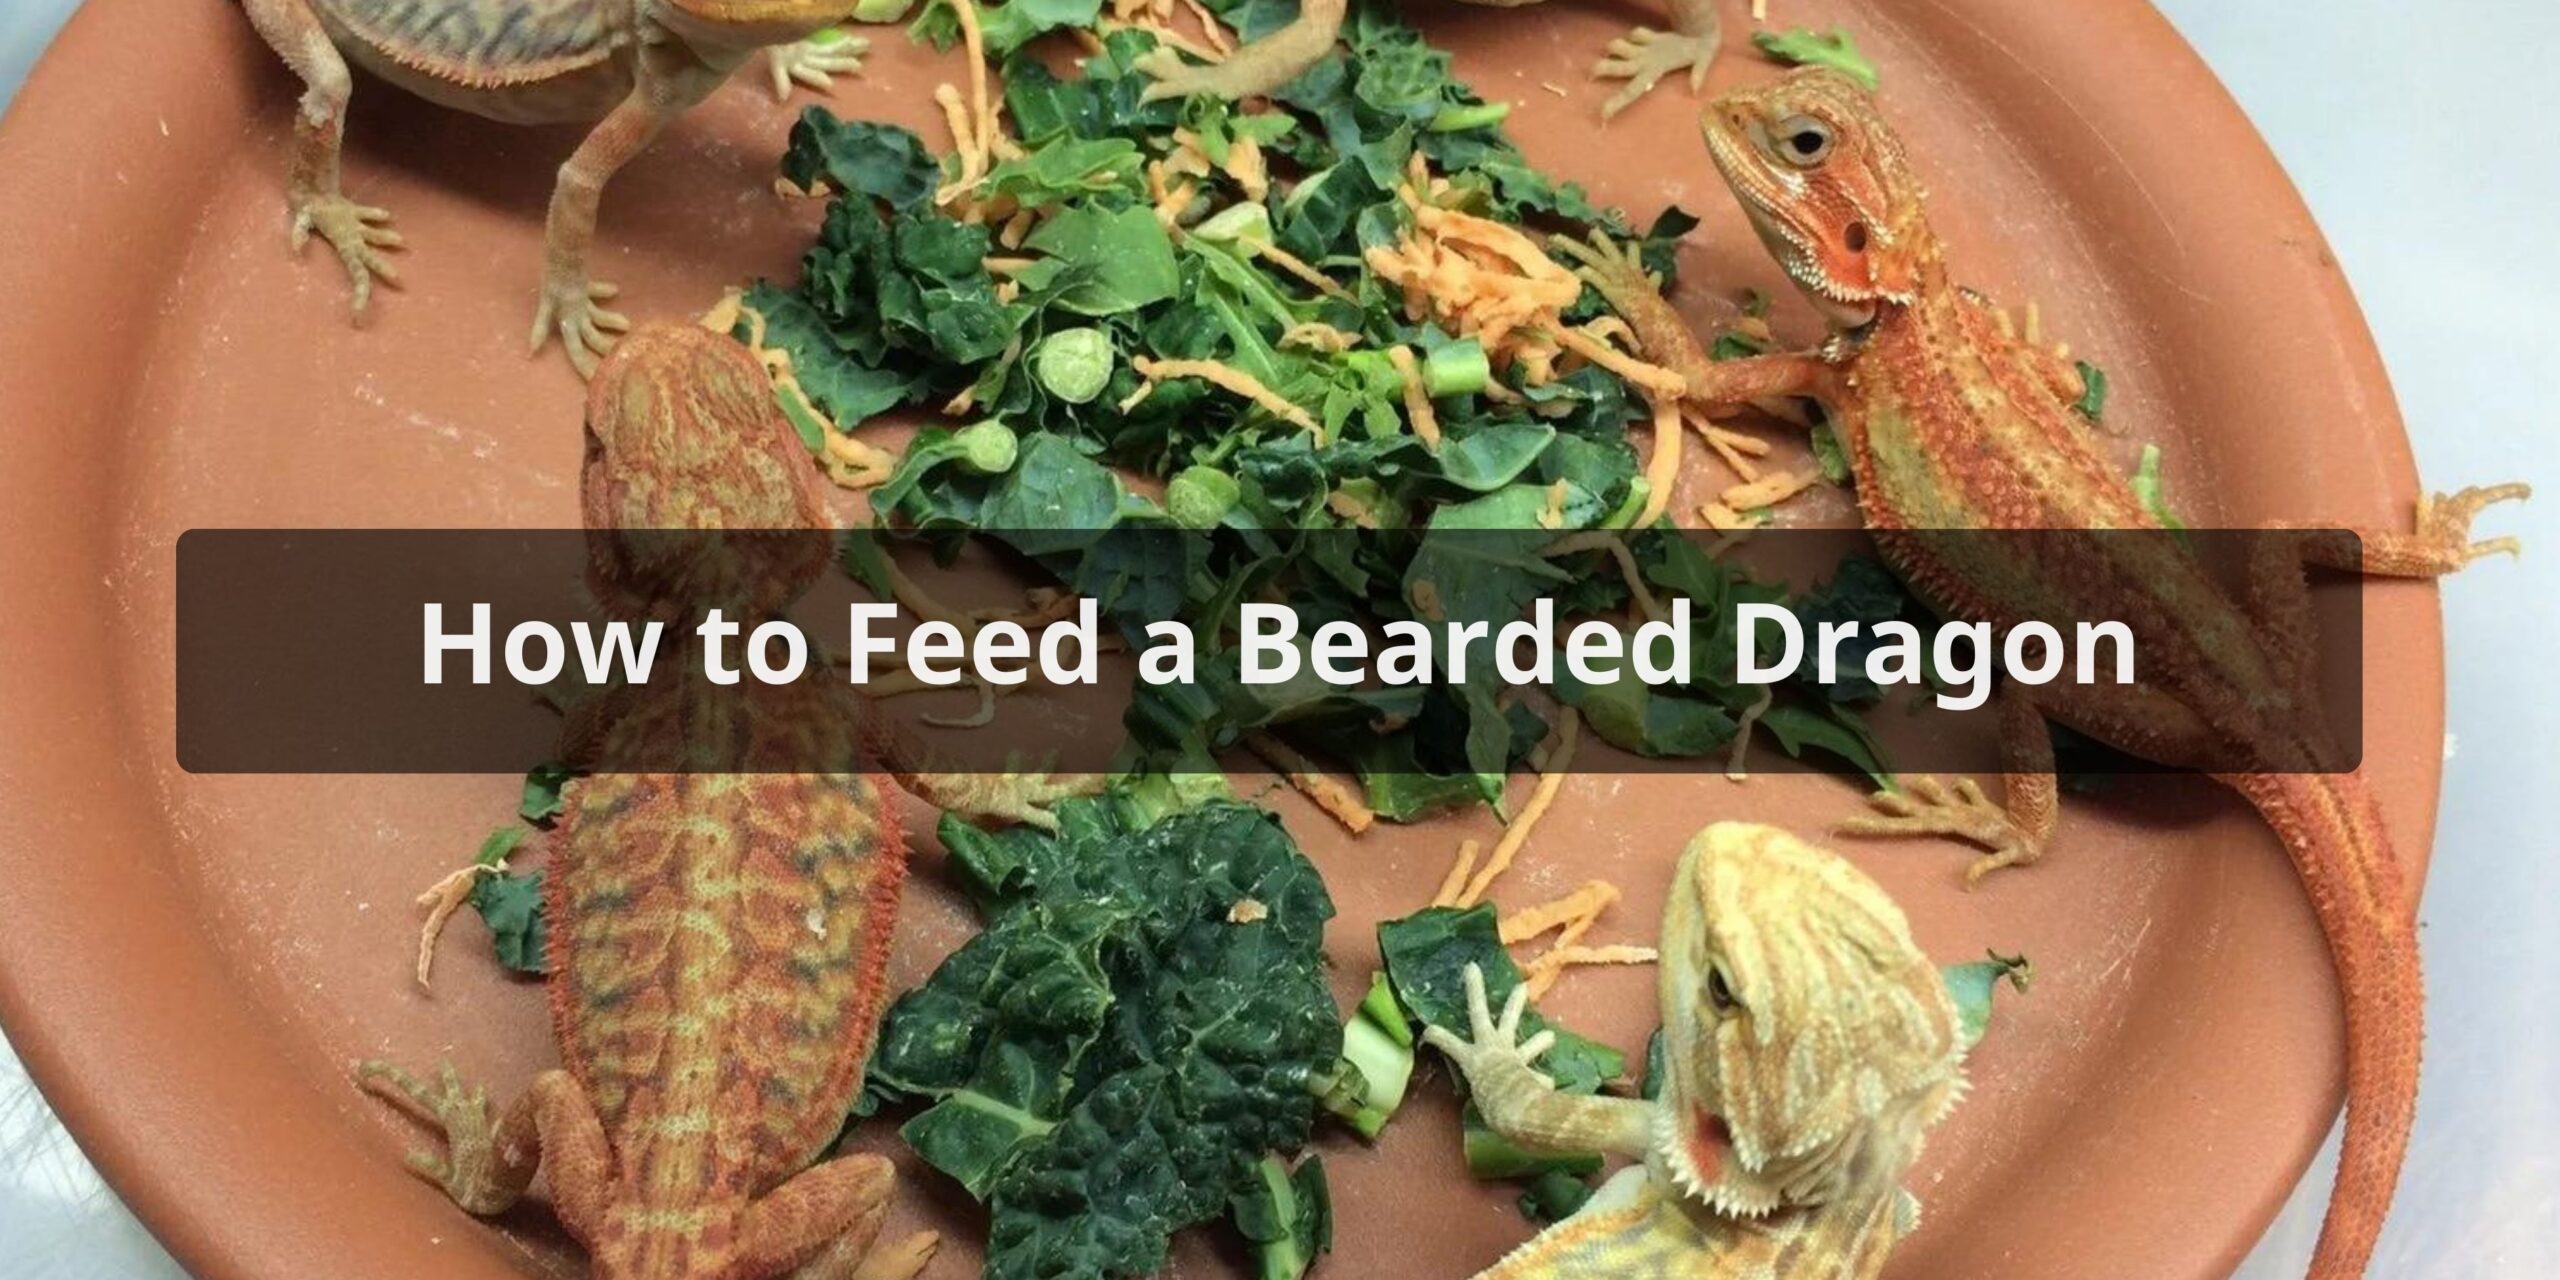 How to Feed a Bearded Dragon